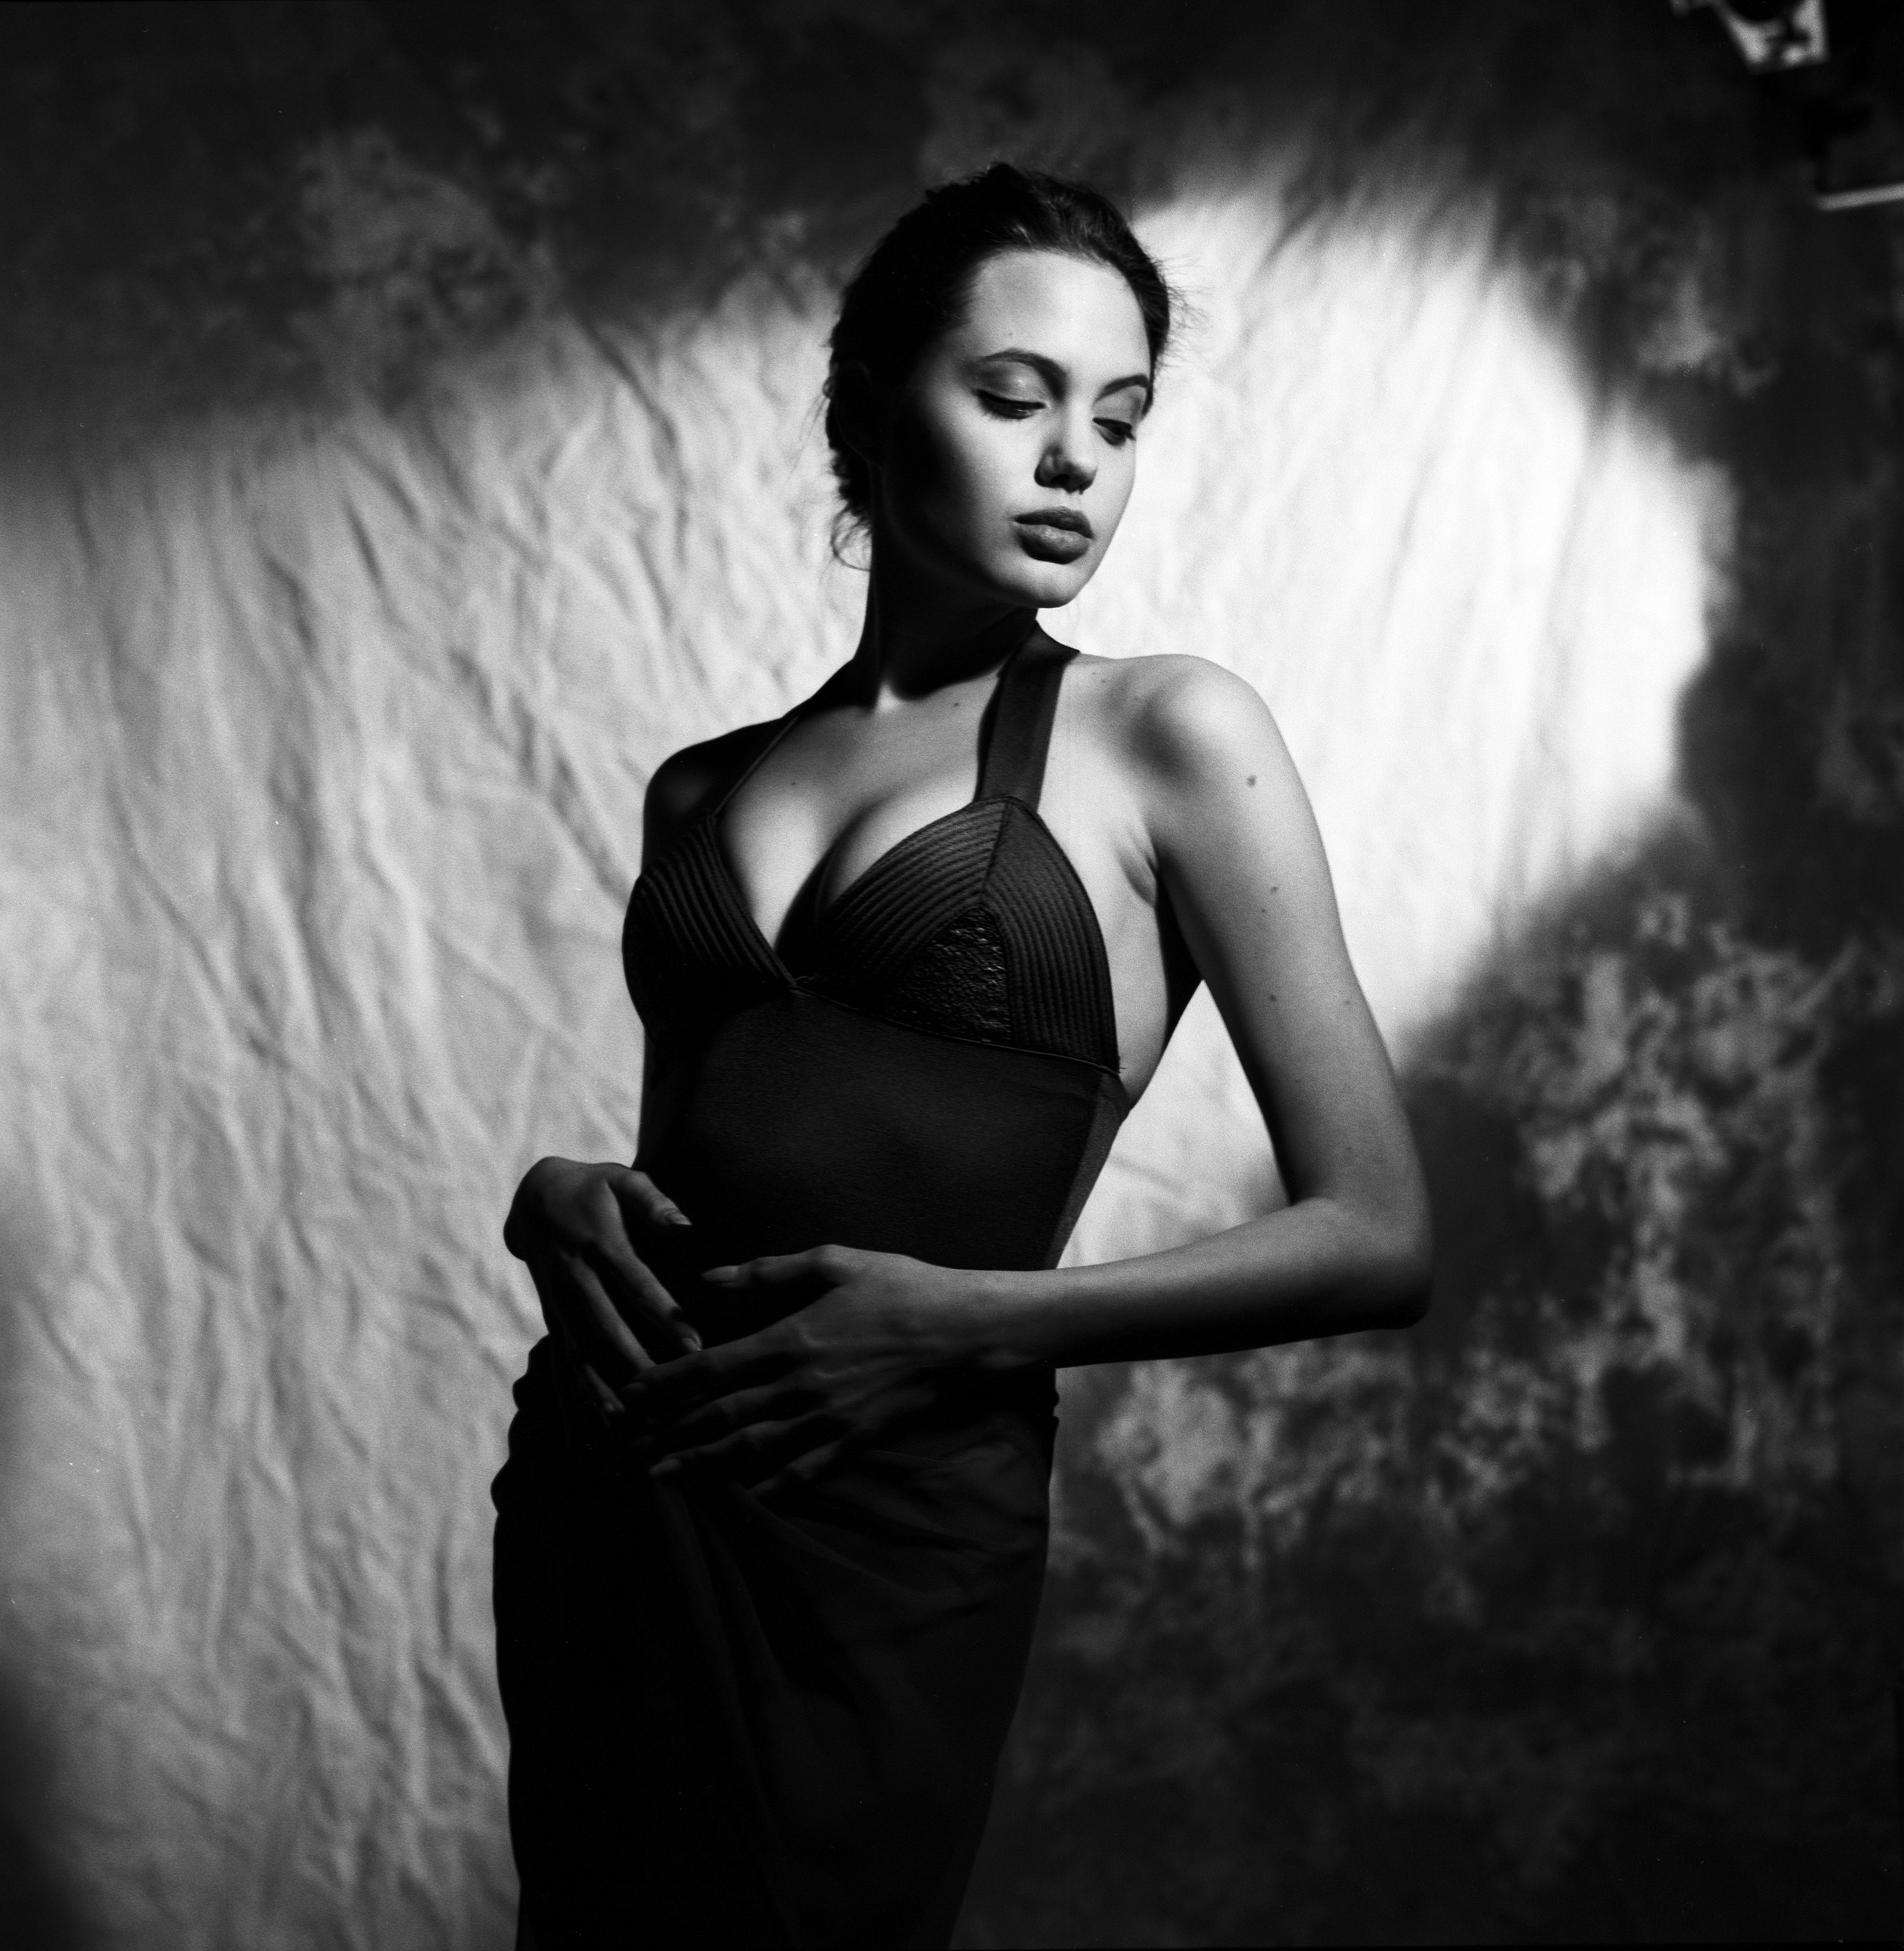 Sixteen year old Angelina Jolie posing seductively for the camera in never-before-seen stills from a lost roll of film.